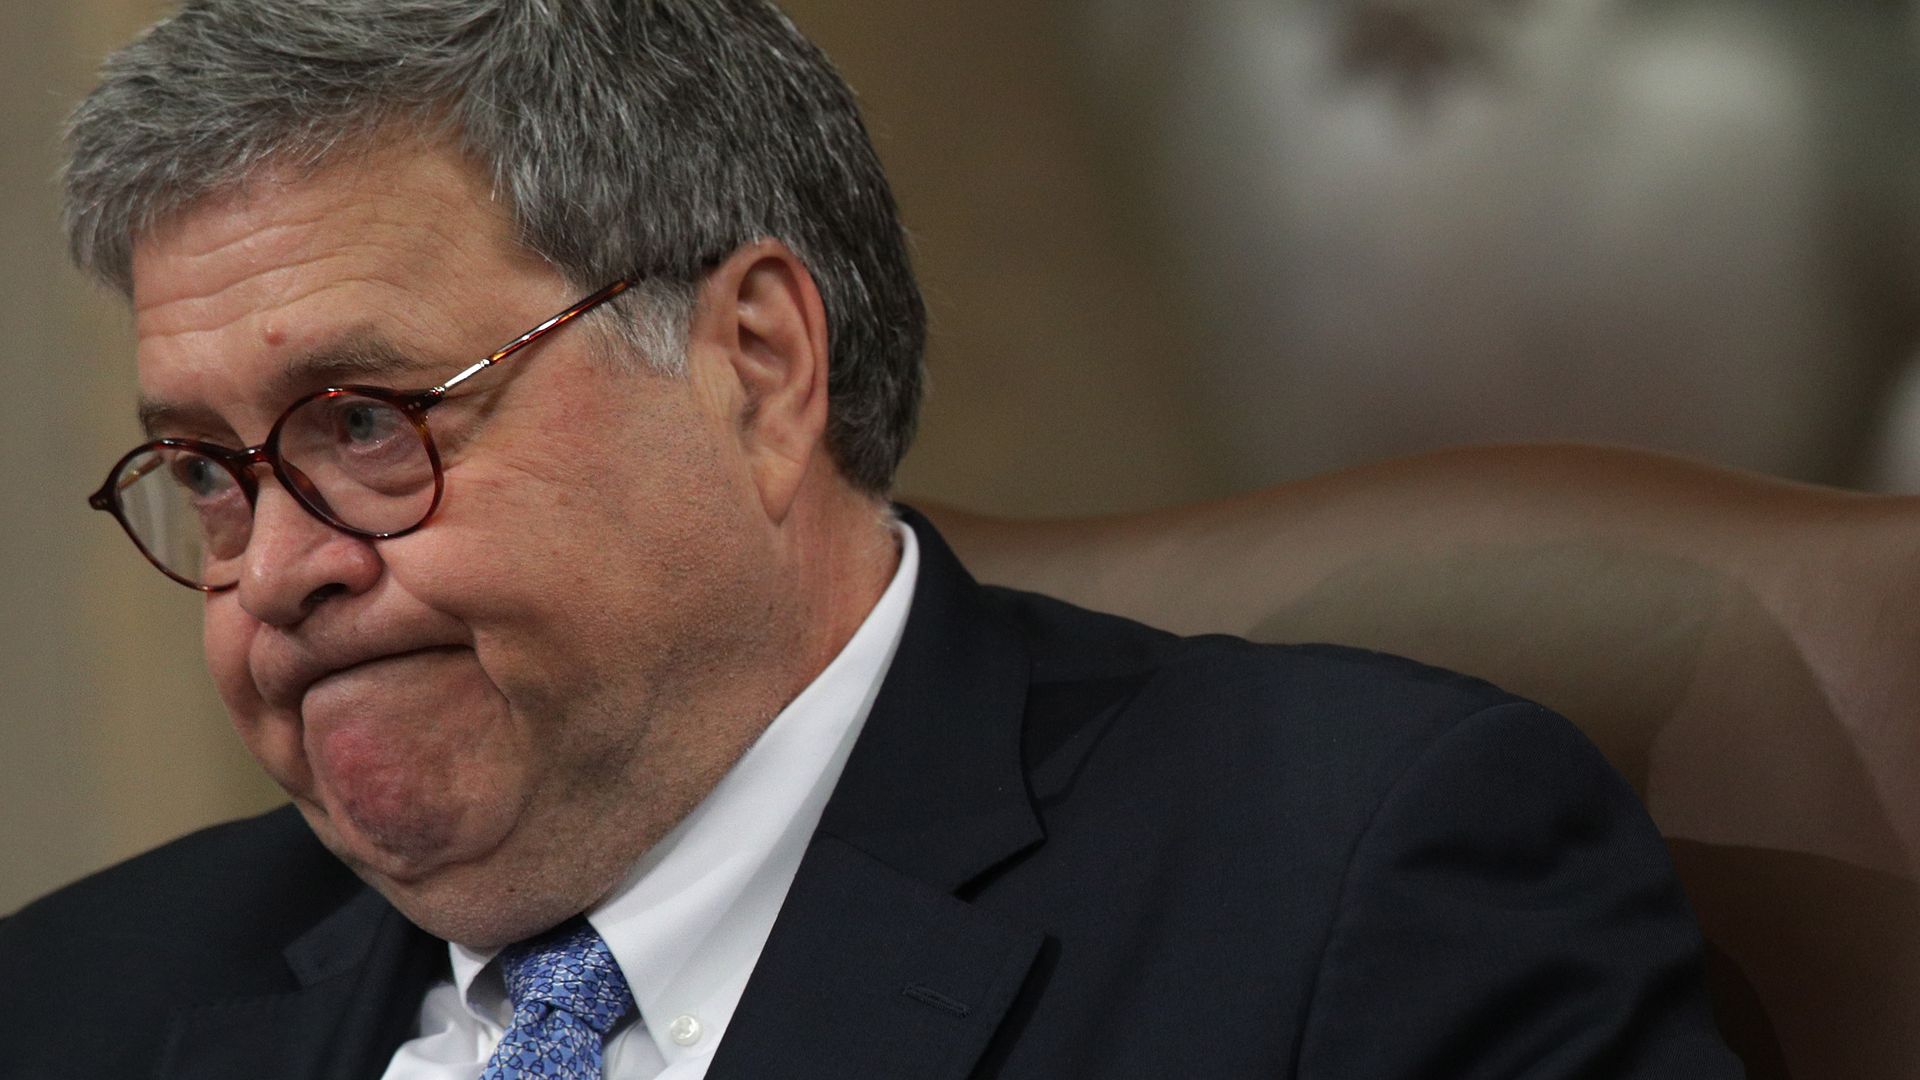 Photo of Attorney General William Barr pursing his lips